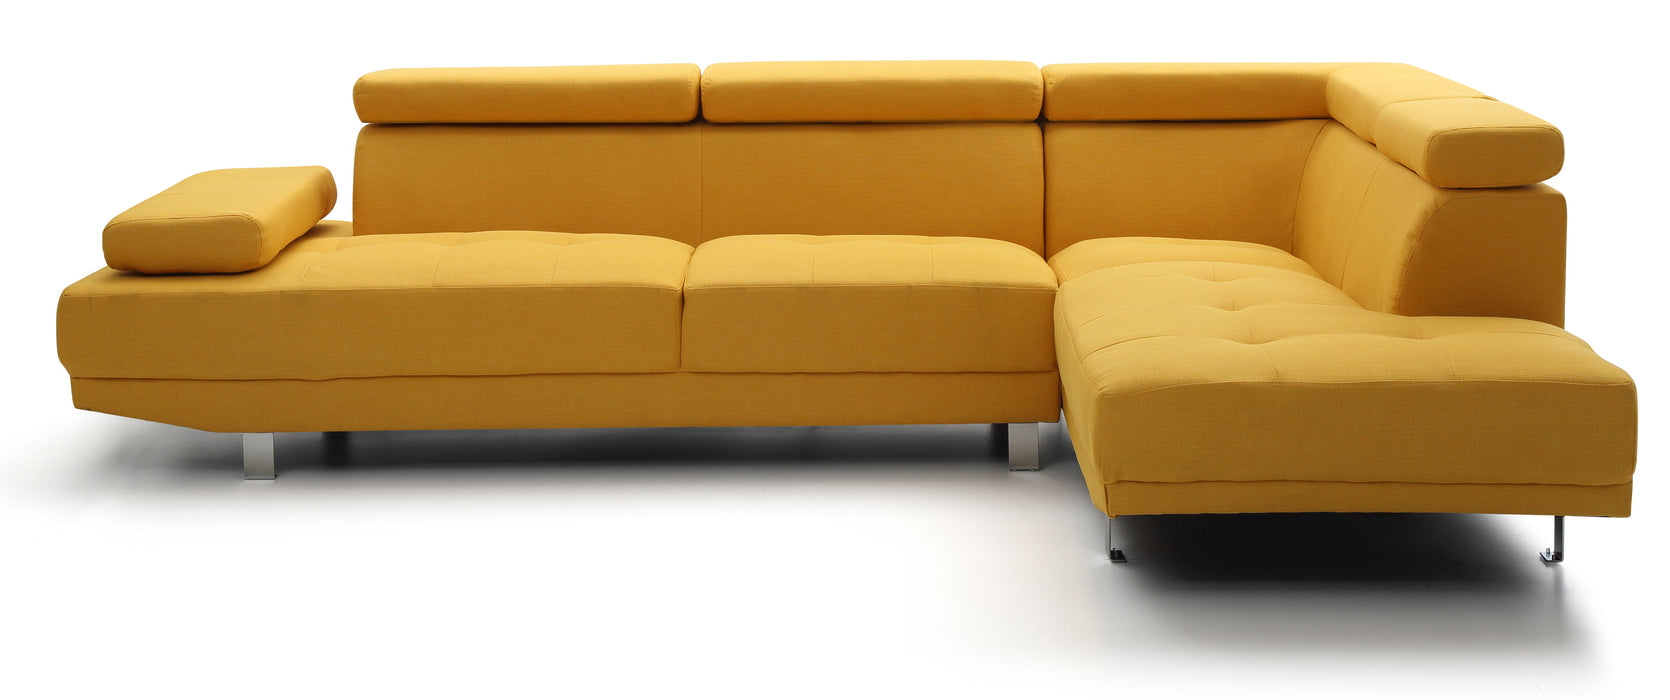 Glory Furniture Riveredge Sectional (2 Boxes), Yellow